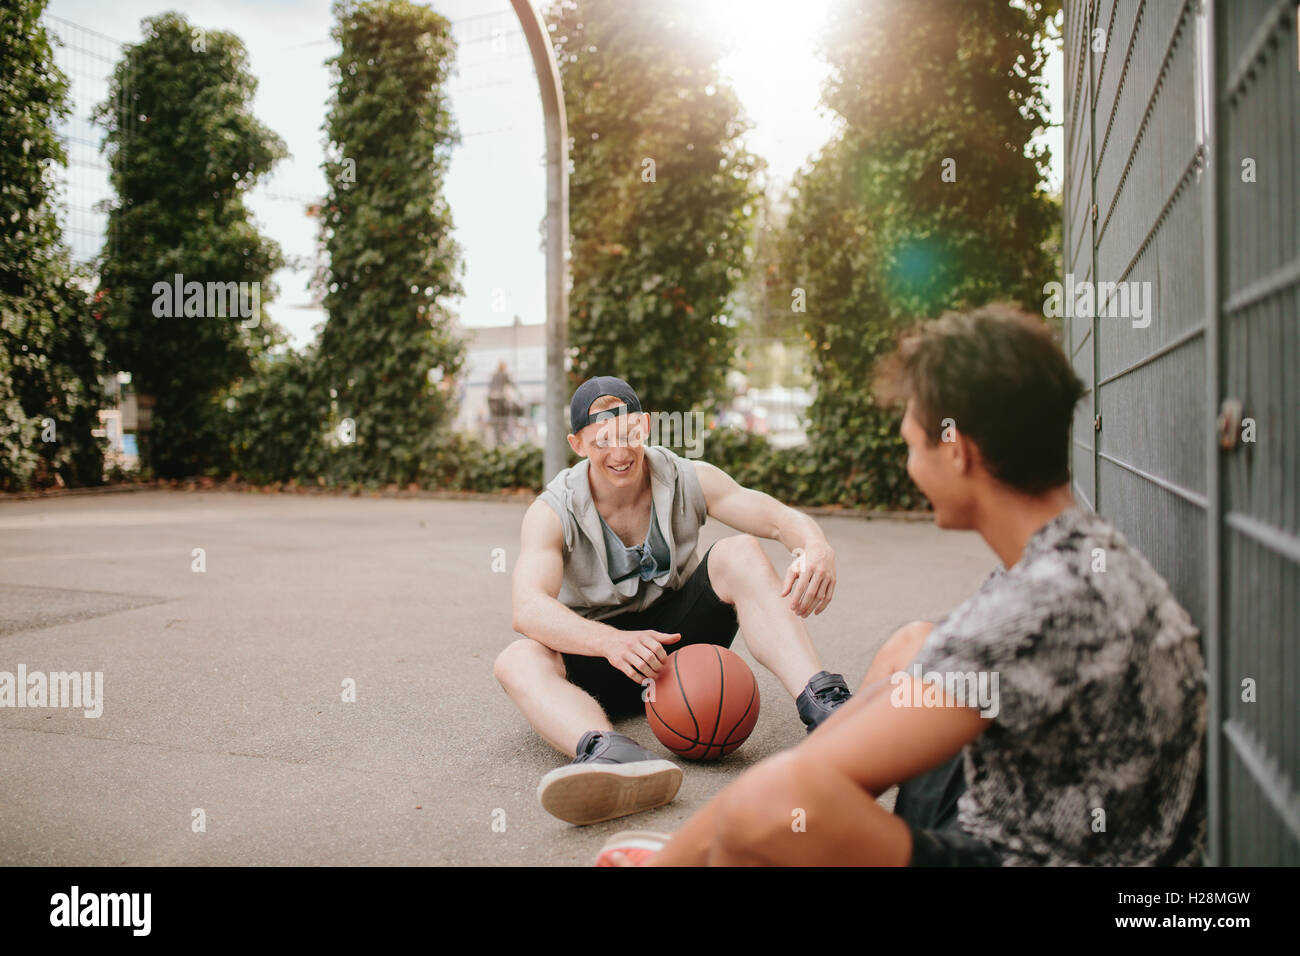 Two young men sitting on basketball court and smiling . Streetball players taking rest after playing a game. Relaxing and having Stock Photo